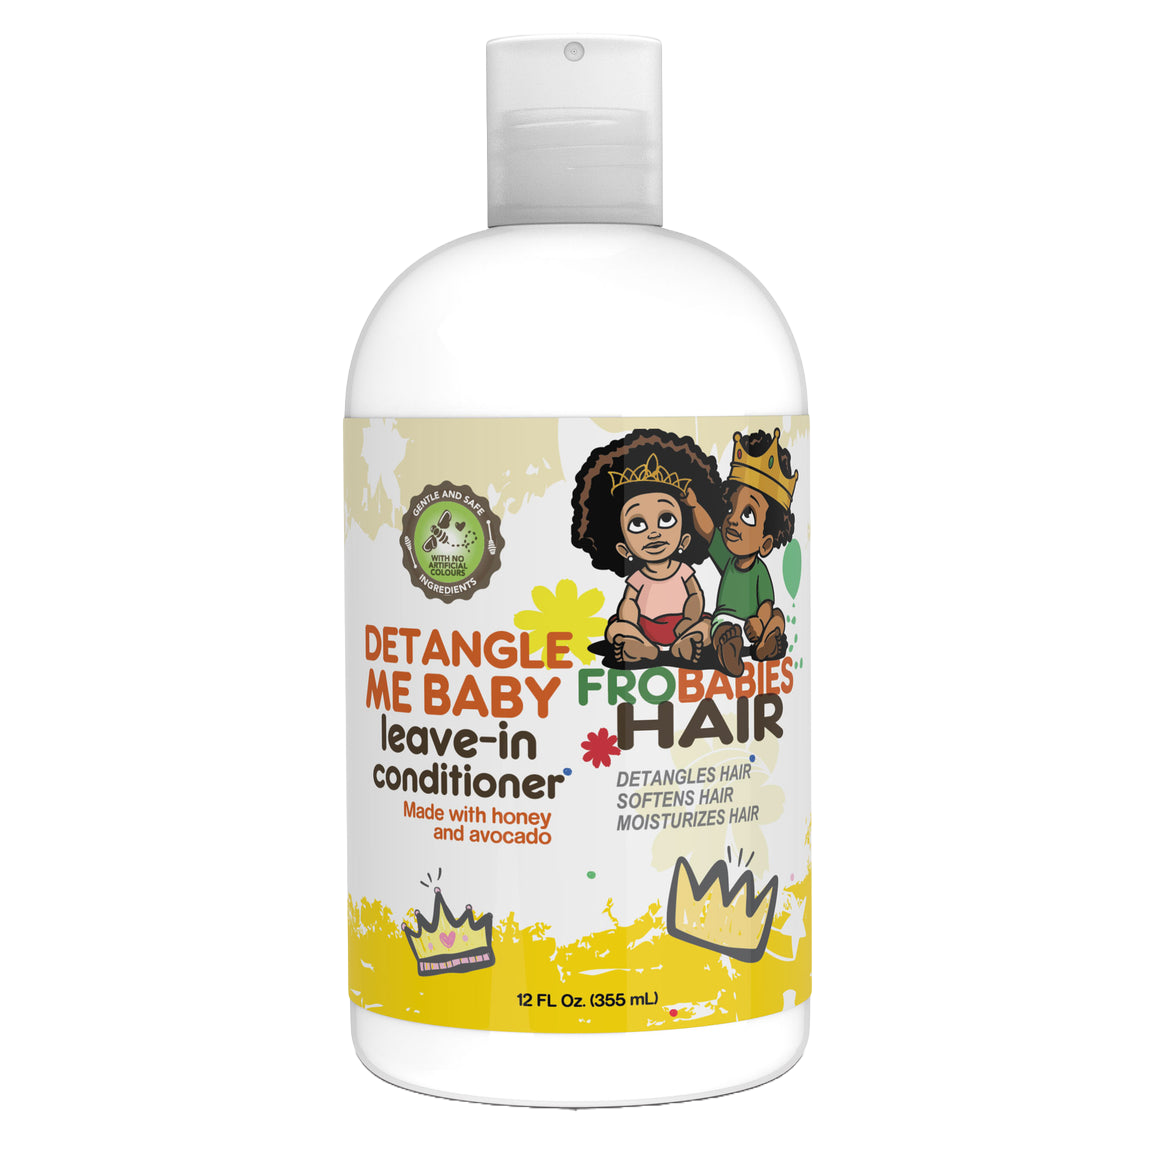 FroBabies Detangle Me Baby Leave-in Conditioner | 12oz